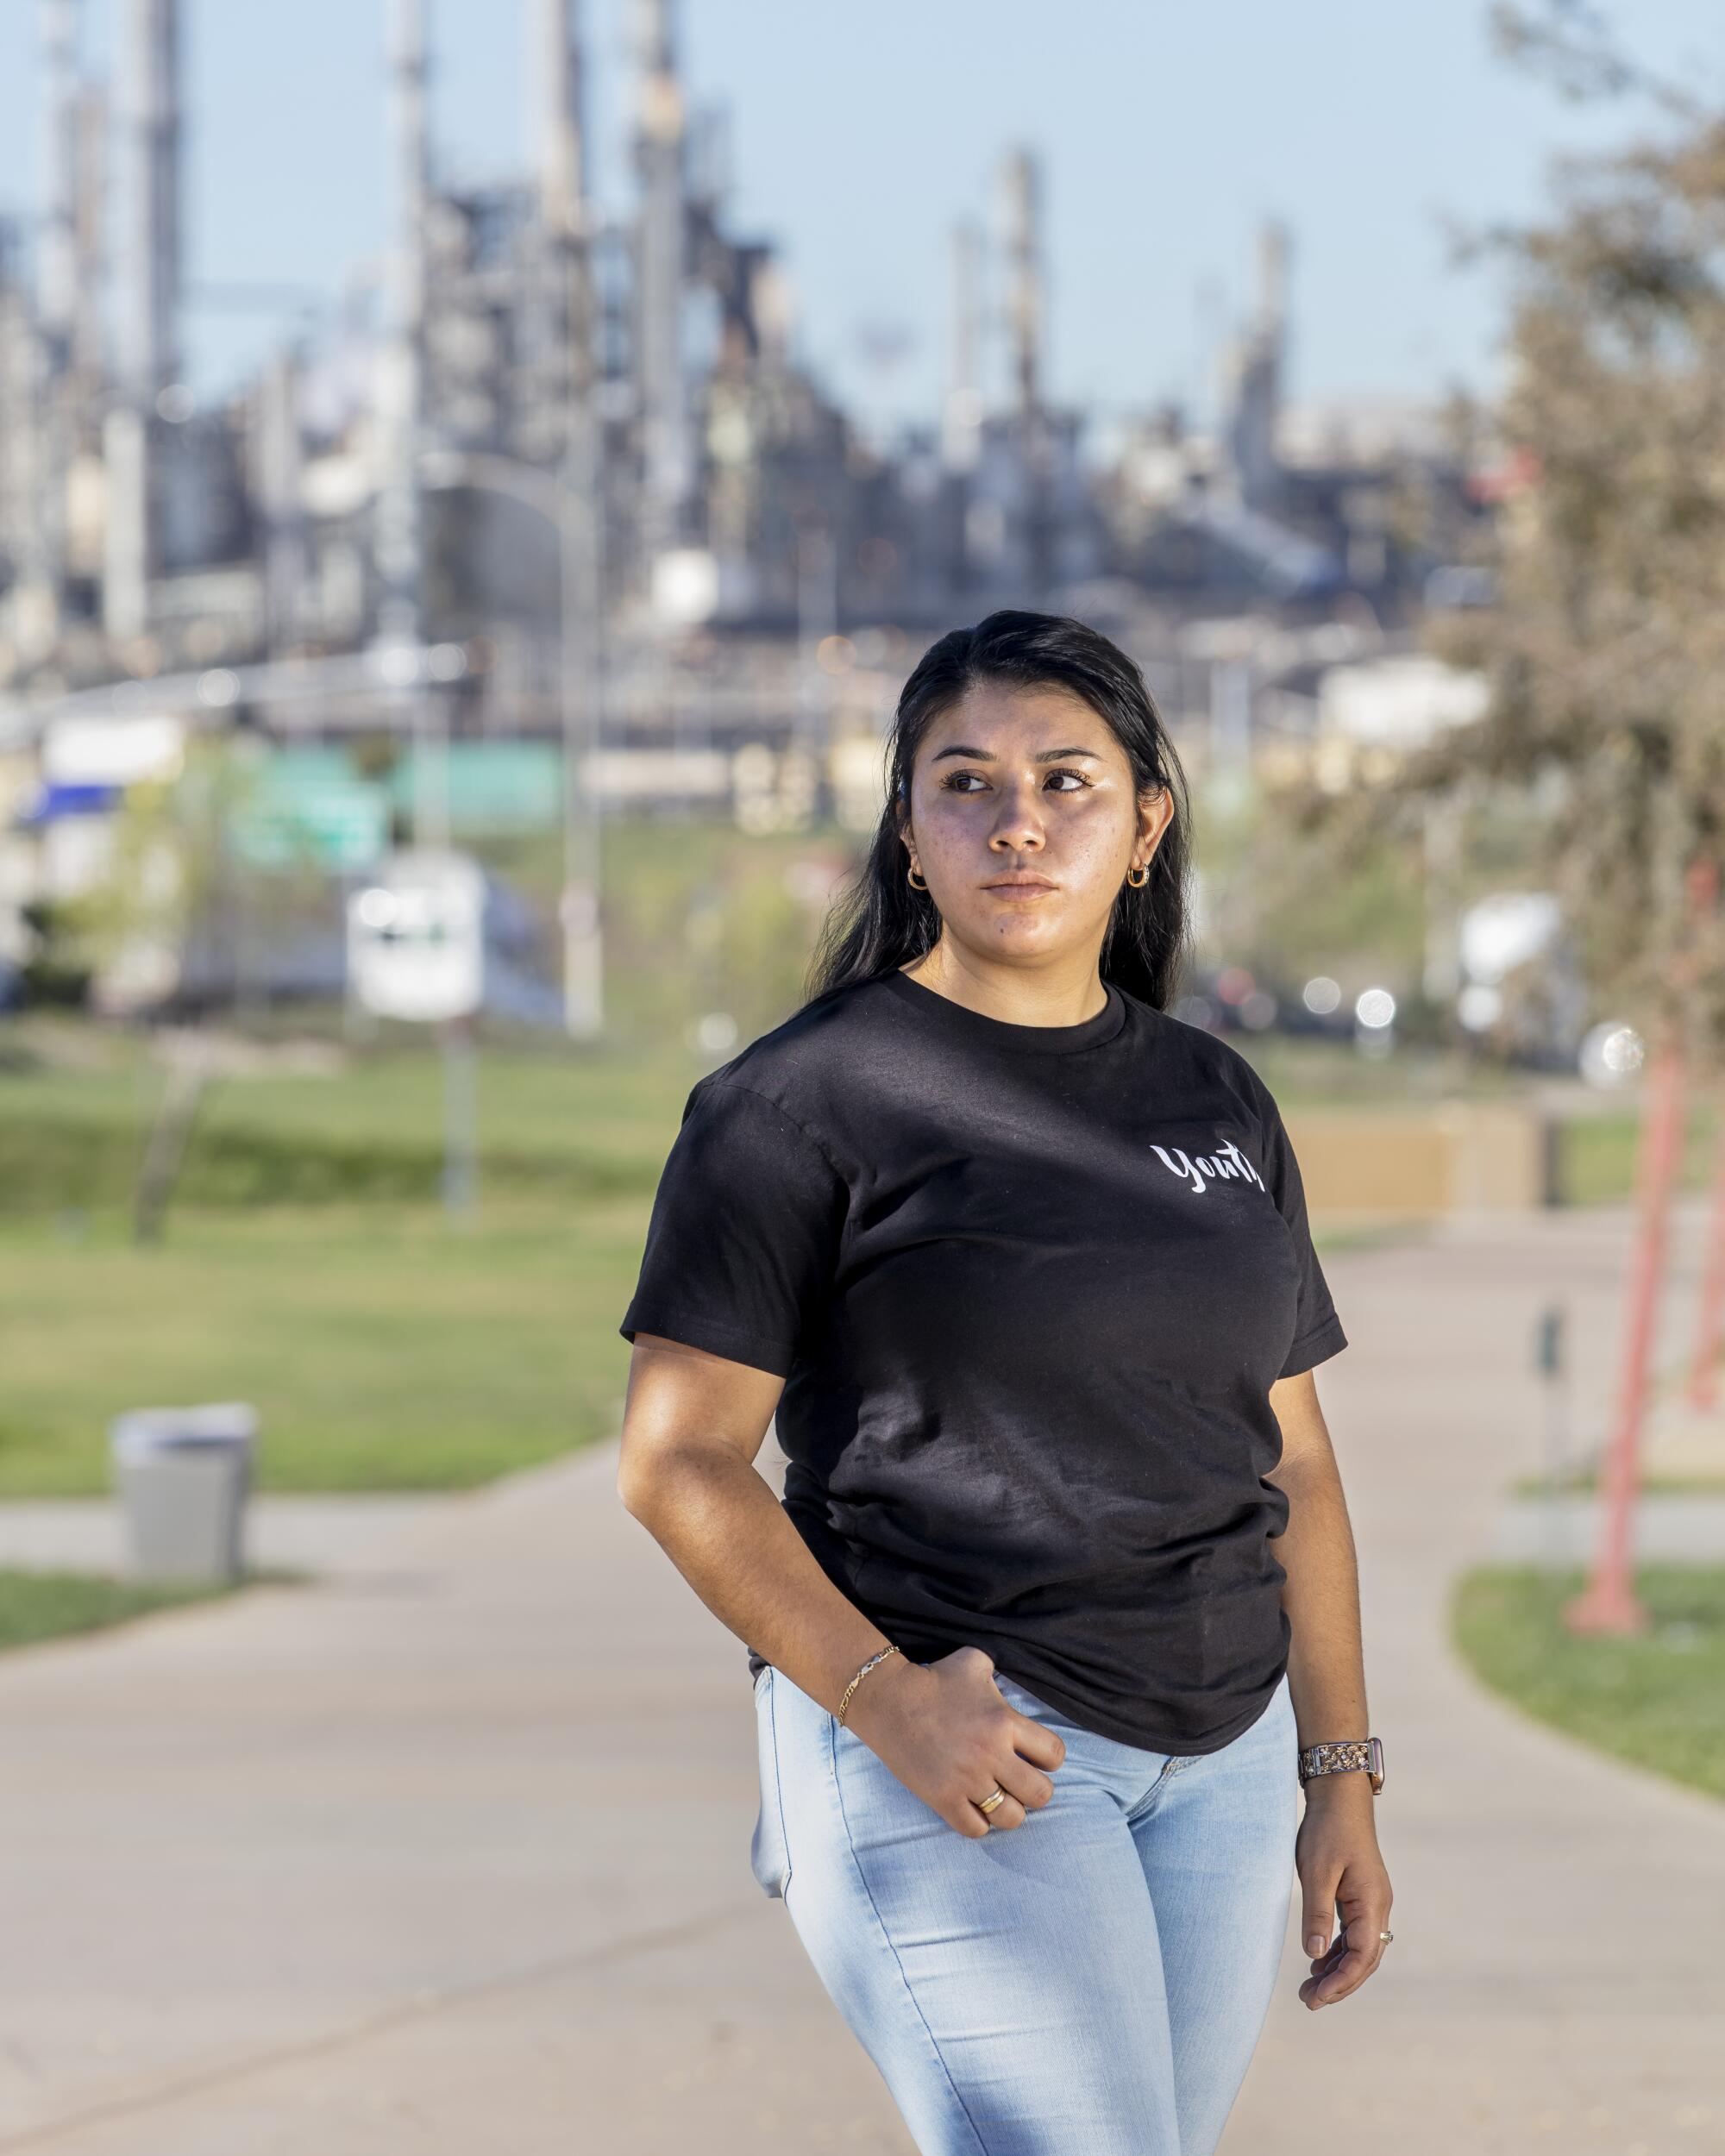 A young woman stands with an oil refinery in the background